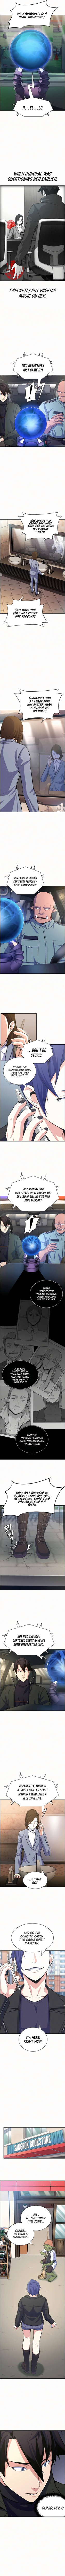 Foreigner on the Periphery Chapter 8 page 3 - MangaWeebs.in